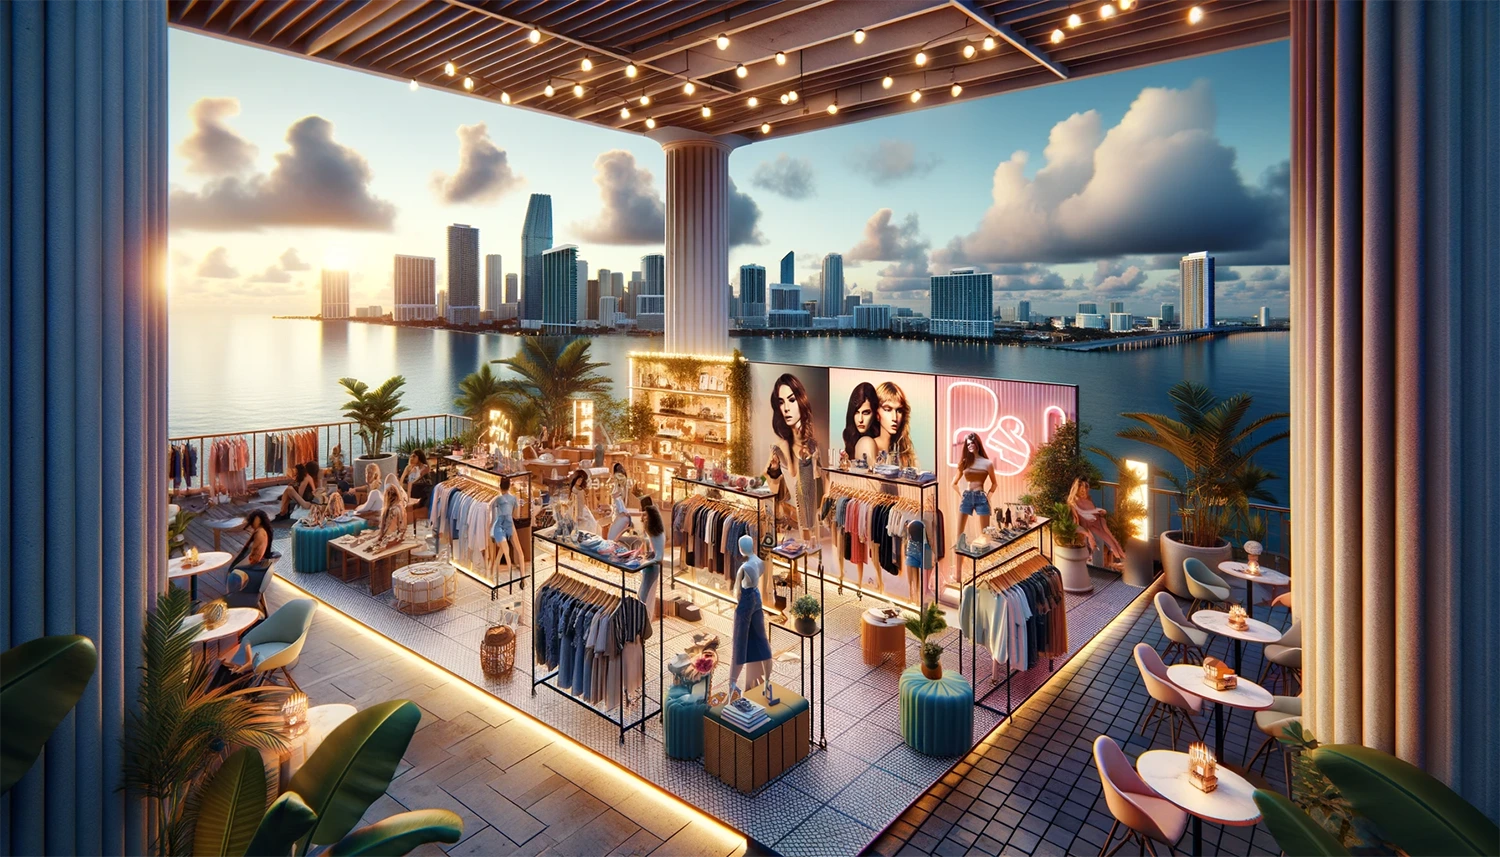 A view of the city from the rooftop of a restaurant bar where a clothing brand has set up a pop-up shop, representing one of the top 10 hospitality and restaurant trends for 2024.